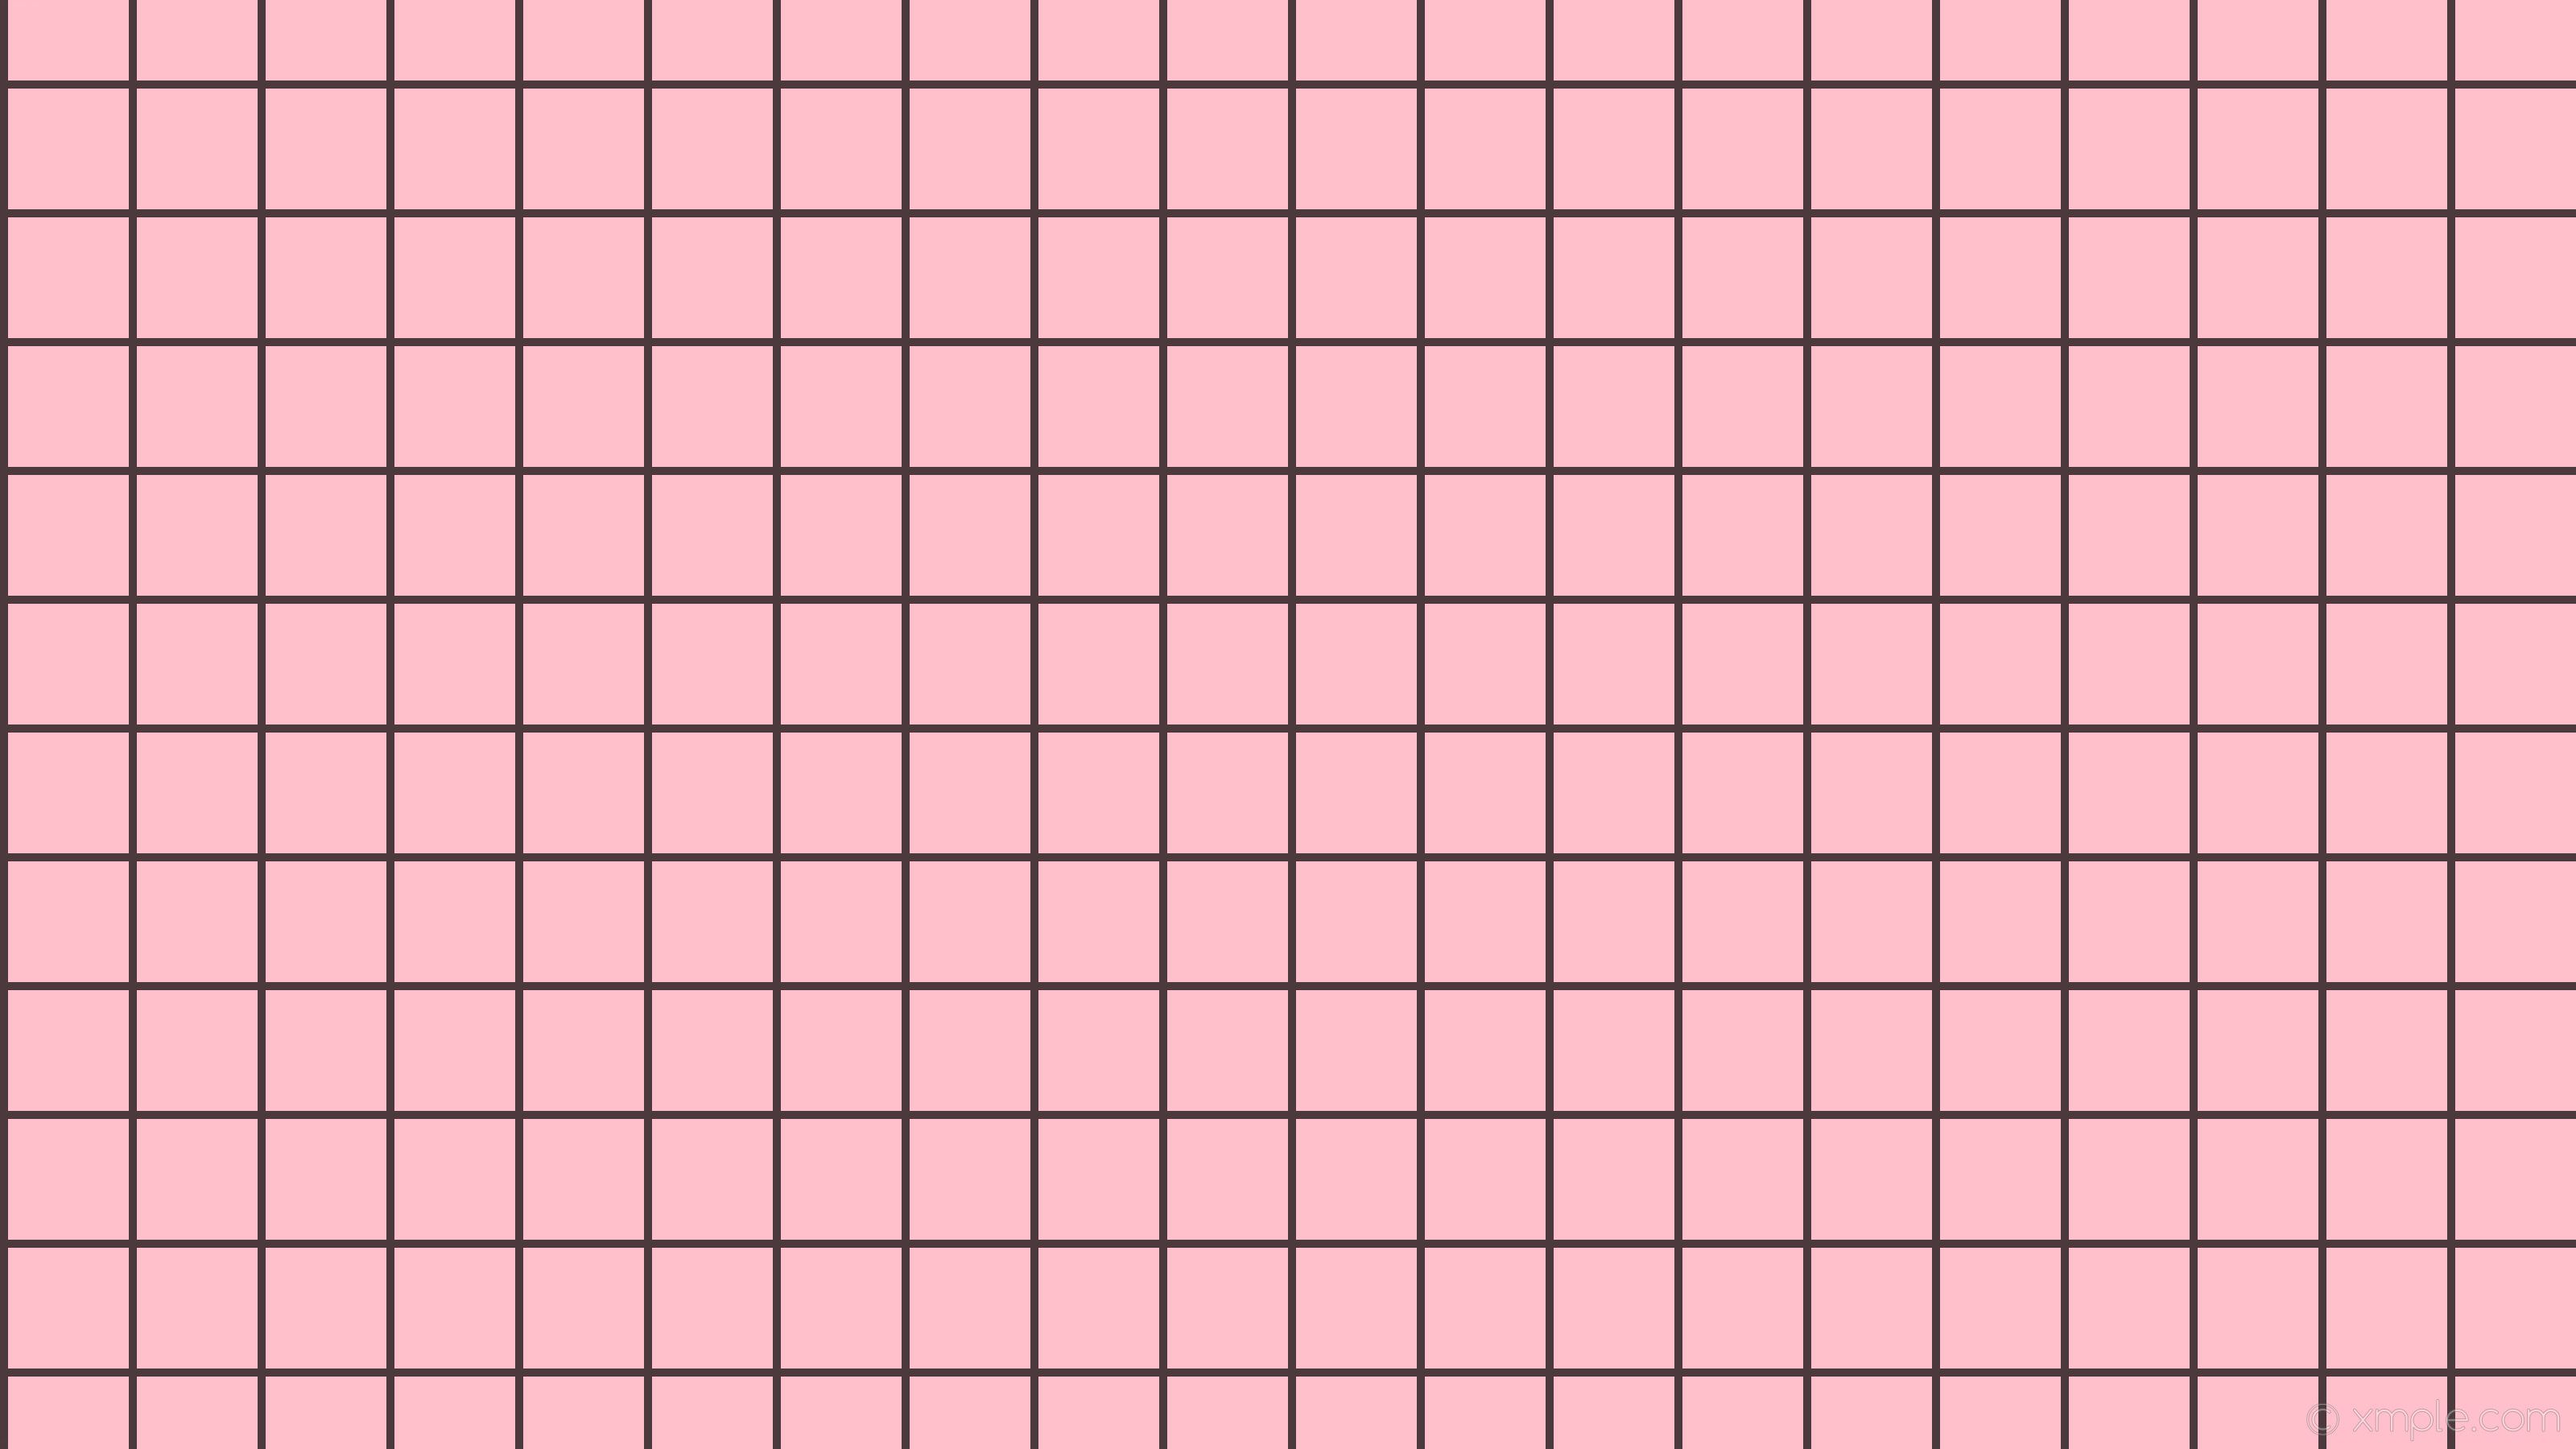 Pink background with black grid lines - Grid